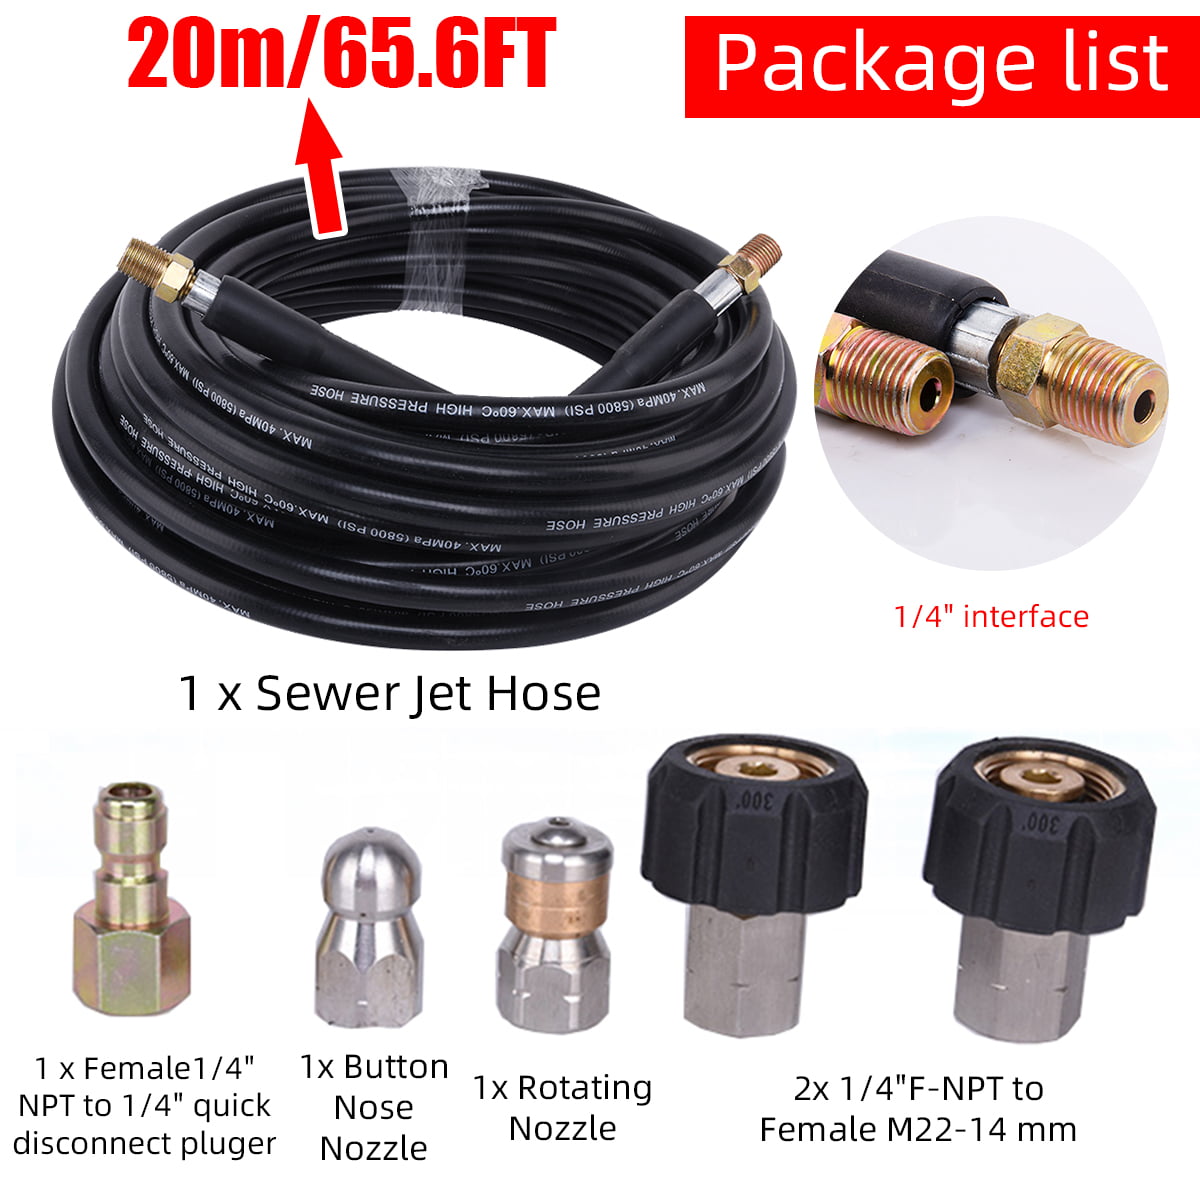 MAMIA PAIRS 100 FT Sewer Jetter Kit for Pressure Washer,Sewer Jetter Nozzles Kit,Drain Cleaning Hose for Pressure Washer,Corner,Button Nose and Rotating Sewer Jetting Nozzle,1/4 Inch NPT,5800 PSI 